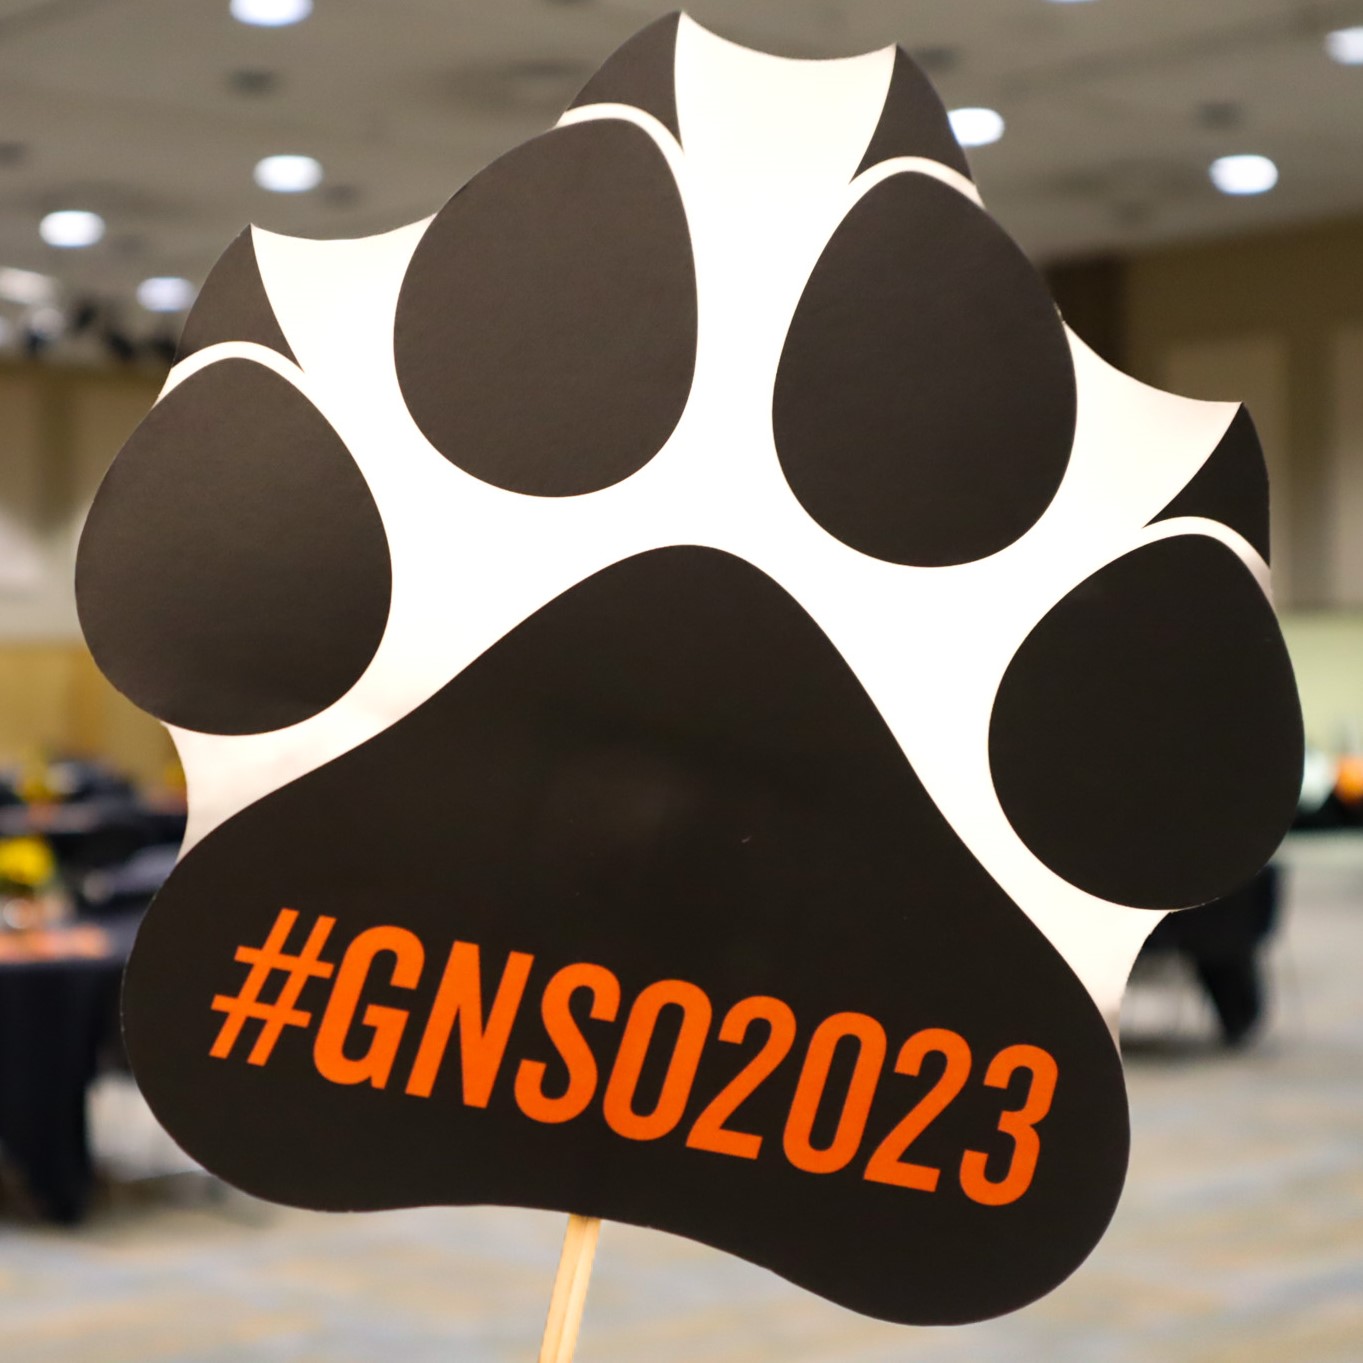 Close up of a photobooth prop shaped like a paw print that says #gnso2023